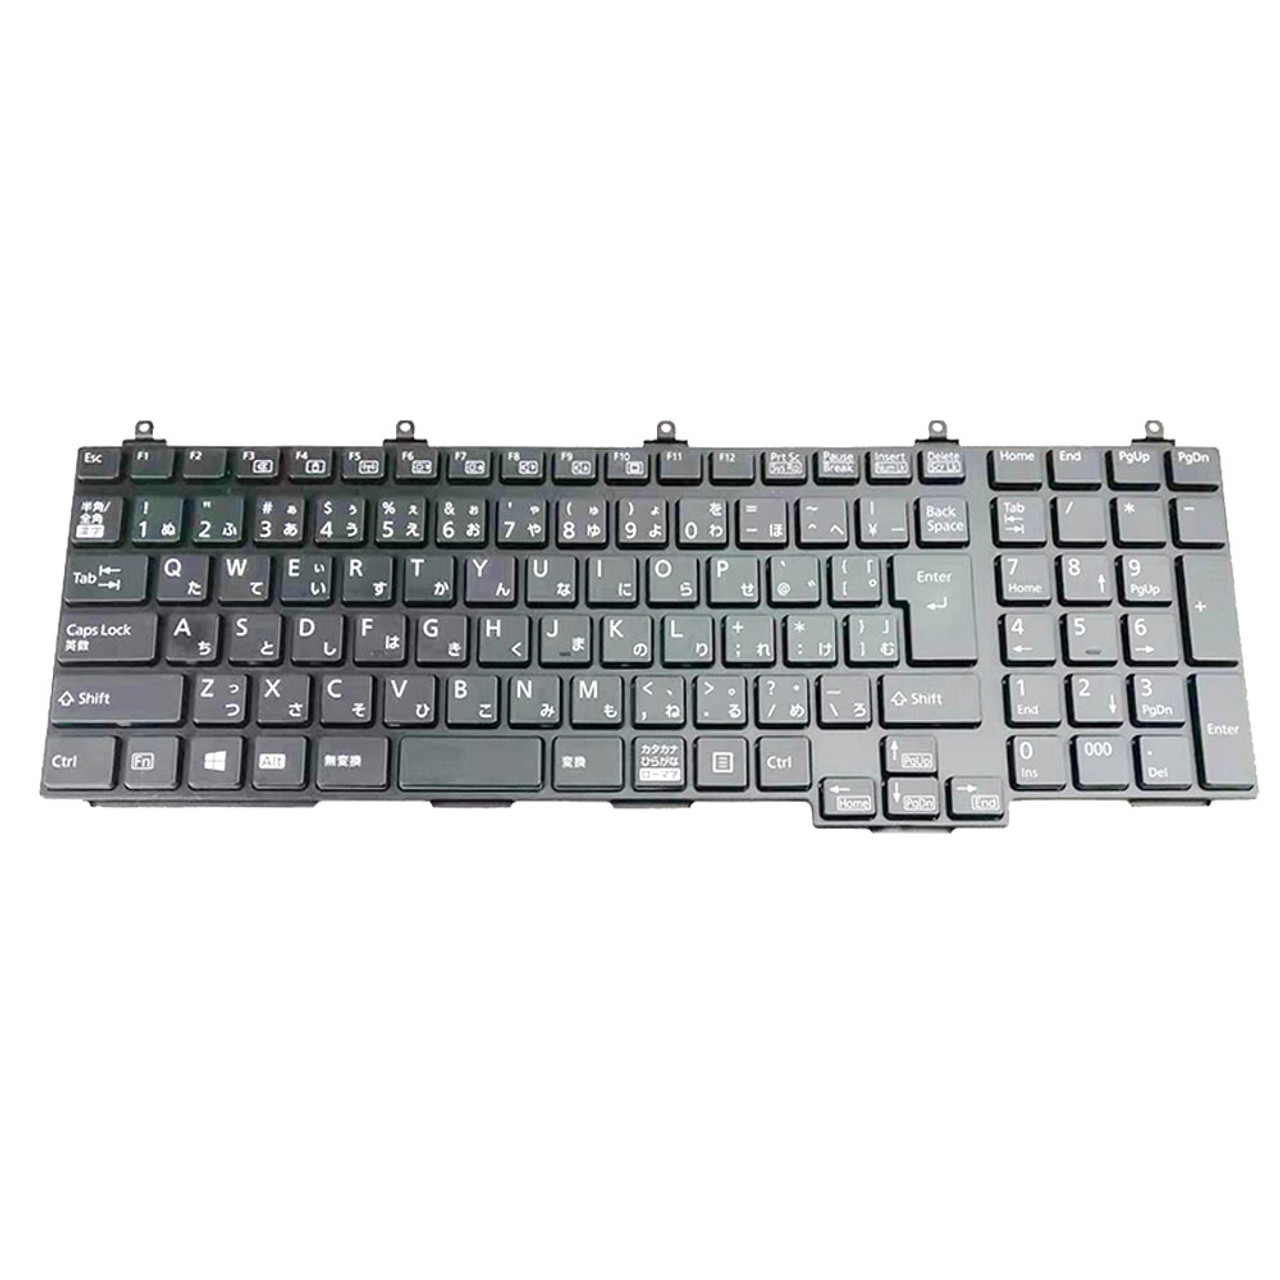 Laptop Keyboard For Fujitsu LifeBook A576/N A576/NW A576/NX A576/P A576/PW  A576/PX Japanese JP JA Black With Numeric Keyboard Used Linda parts